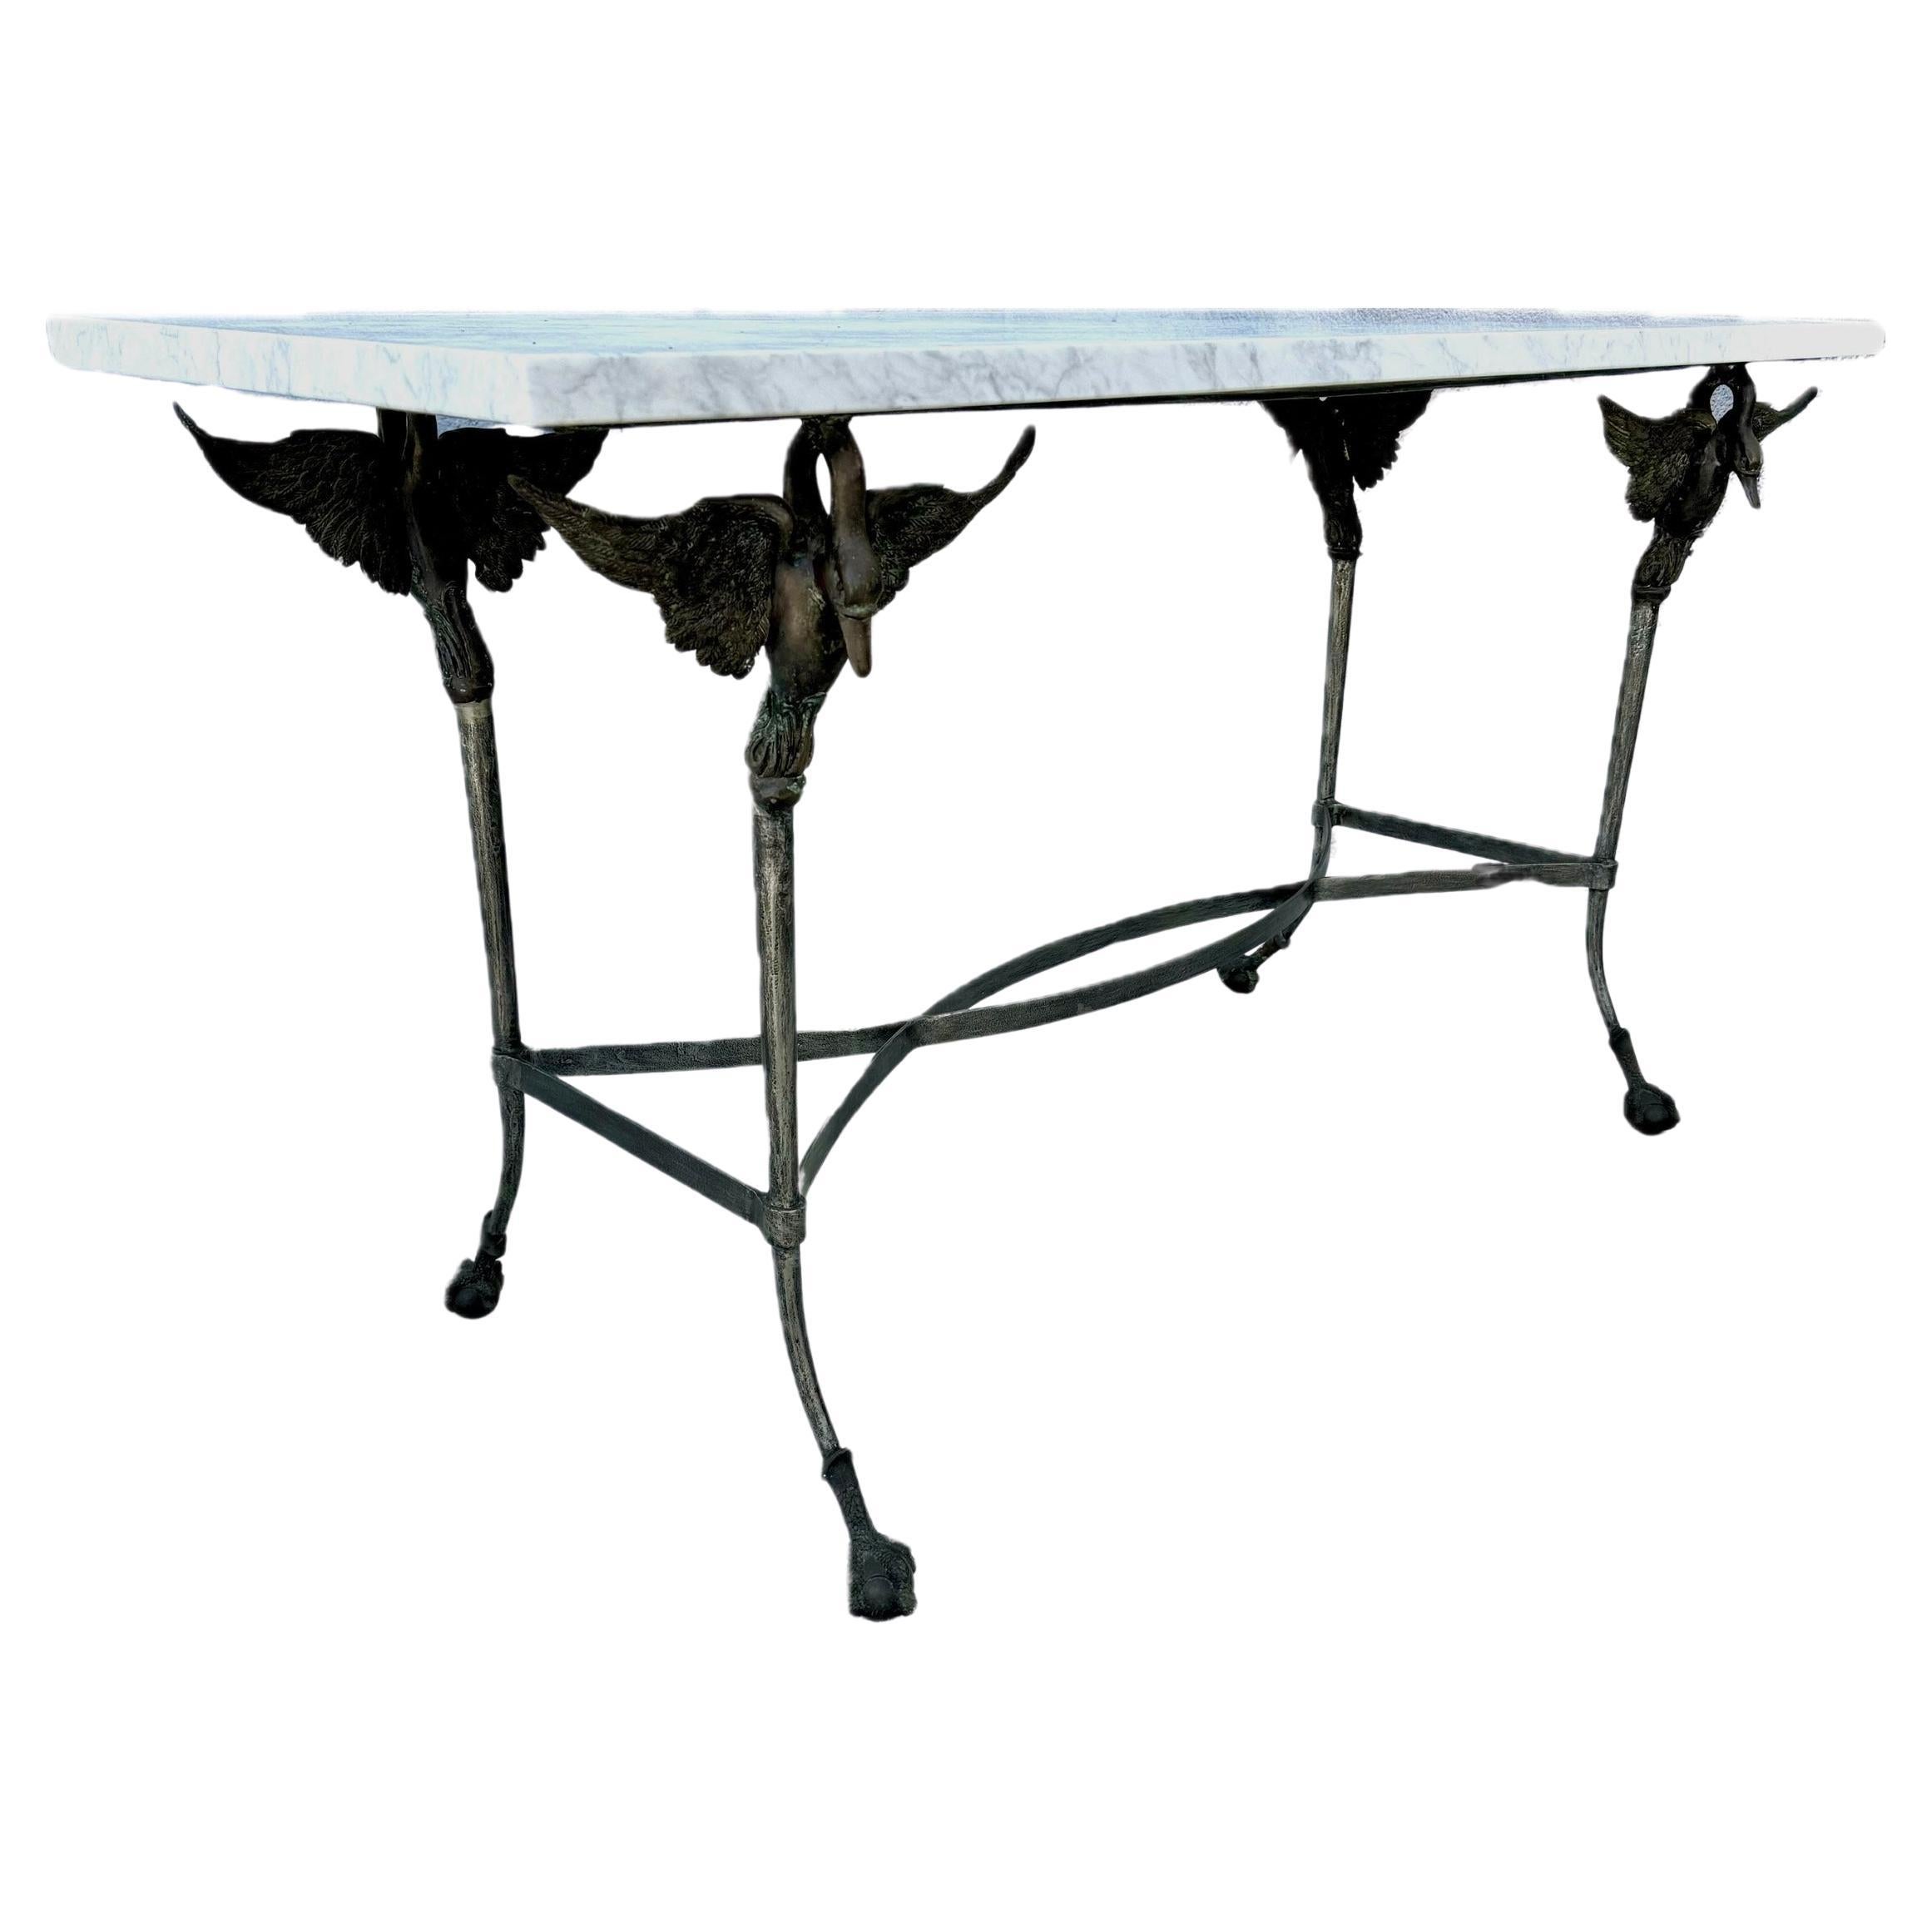 French Carrara Marble Top Steel Table With Bronze Swans For Sale